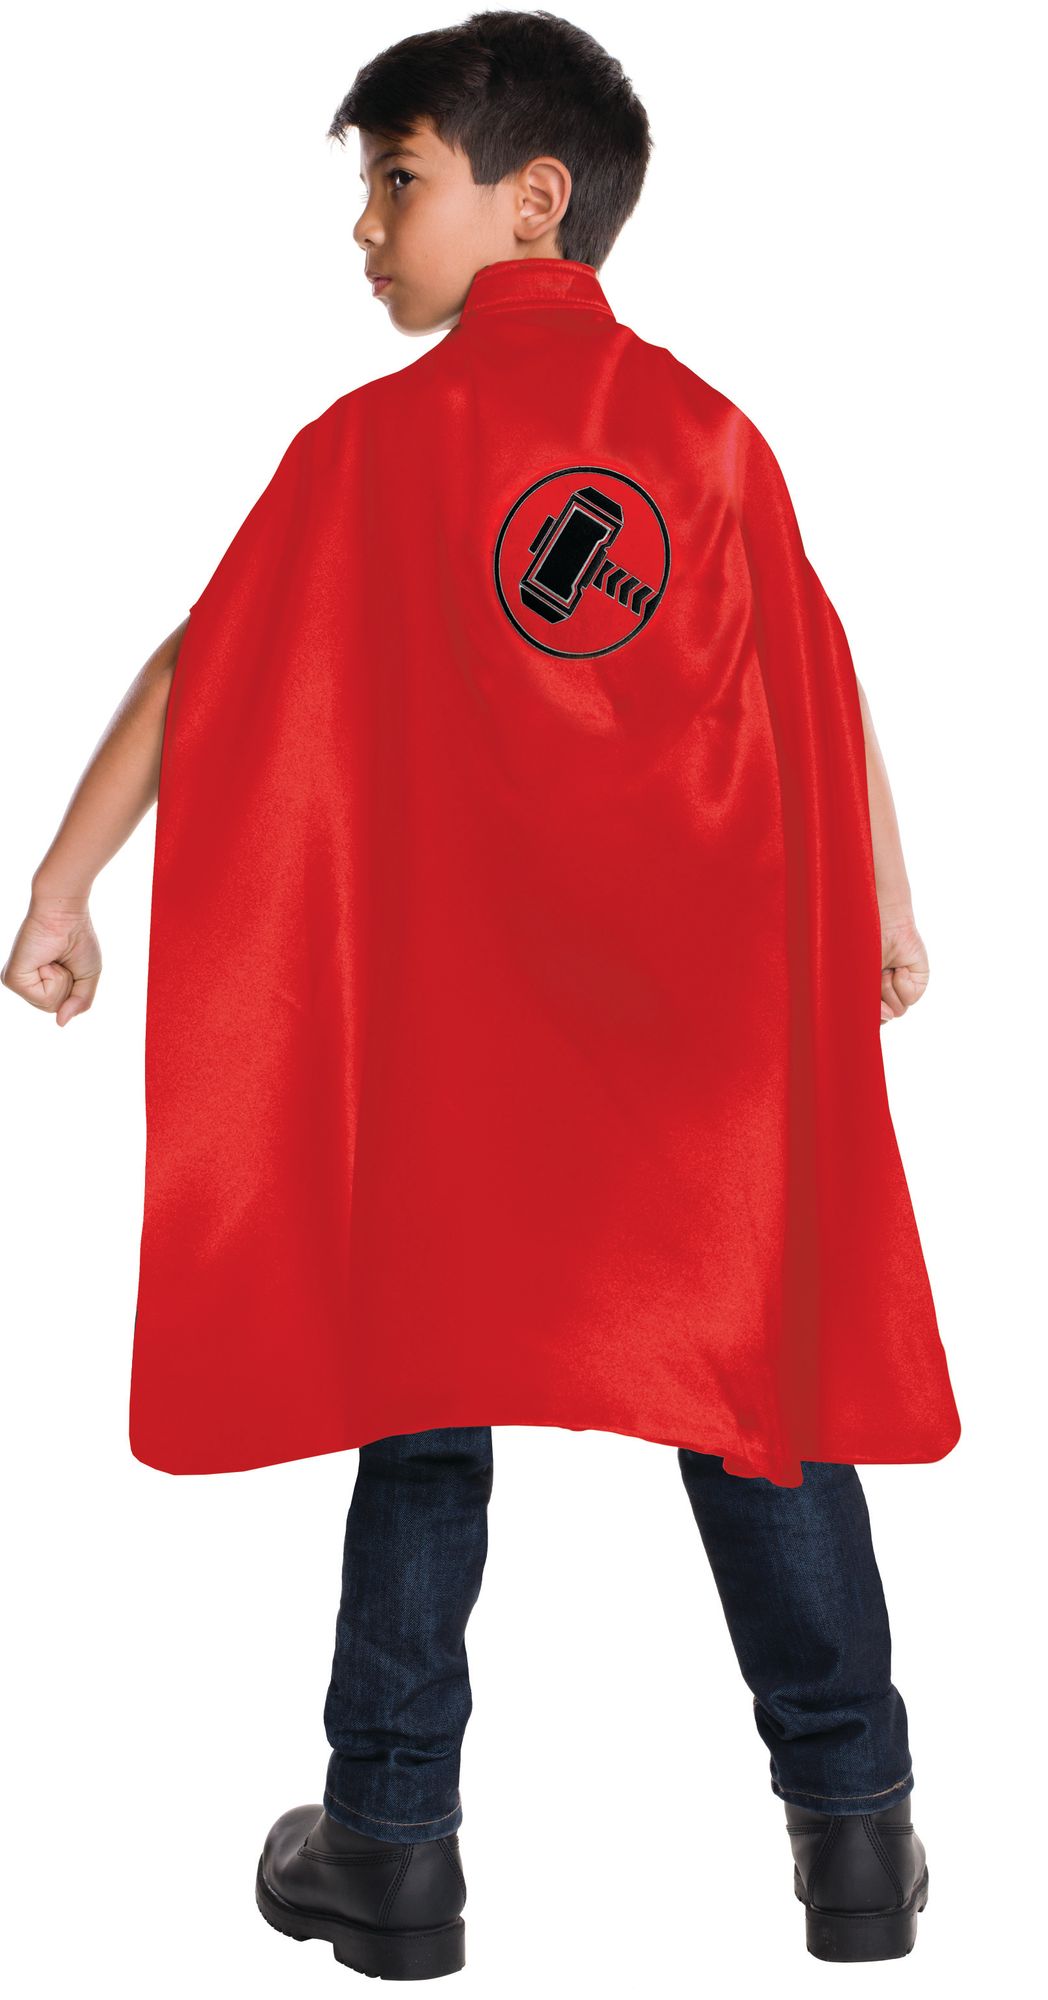 ACCESSOIRESDEFETES-CAPES-THOR